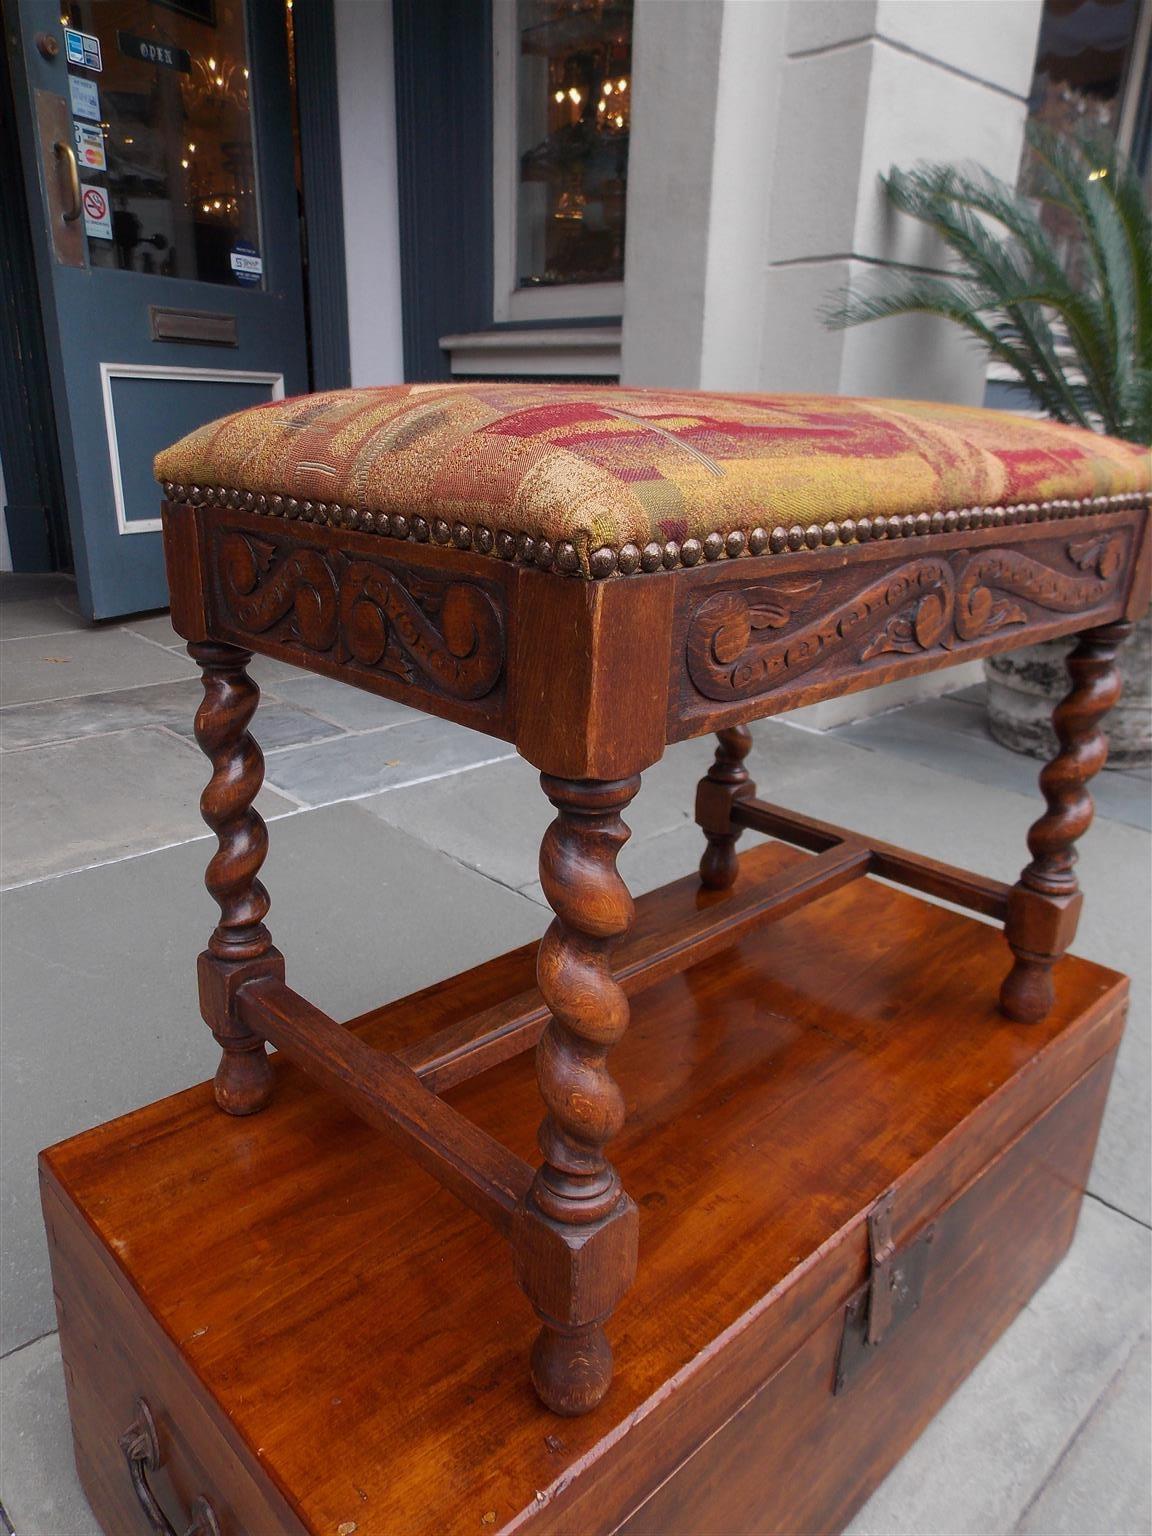 Brass French Walnut Decorative Carved Upholstered Stool with Barley Twist Legs, C 1850 For Sale